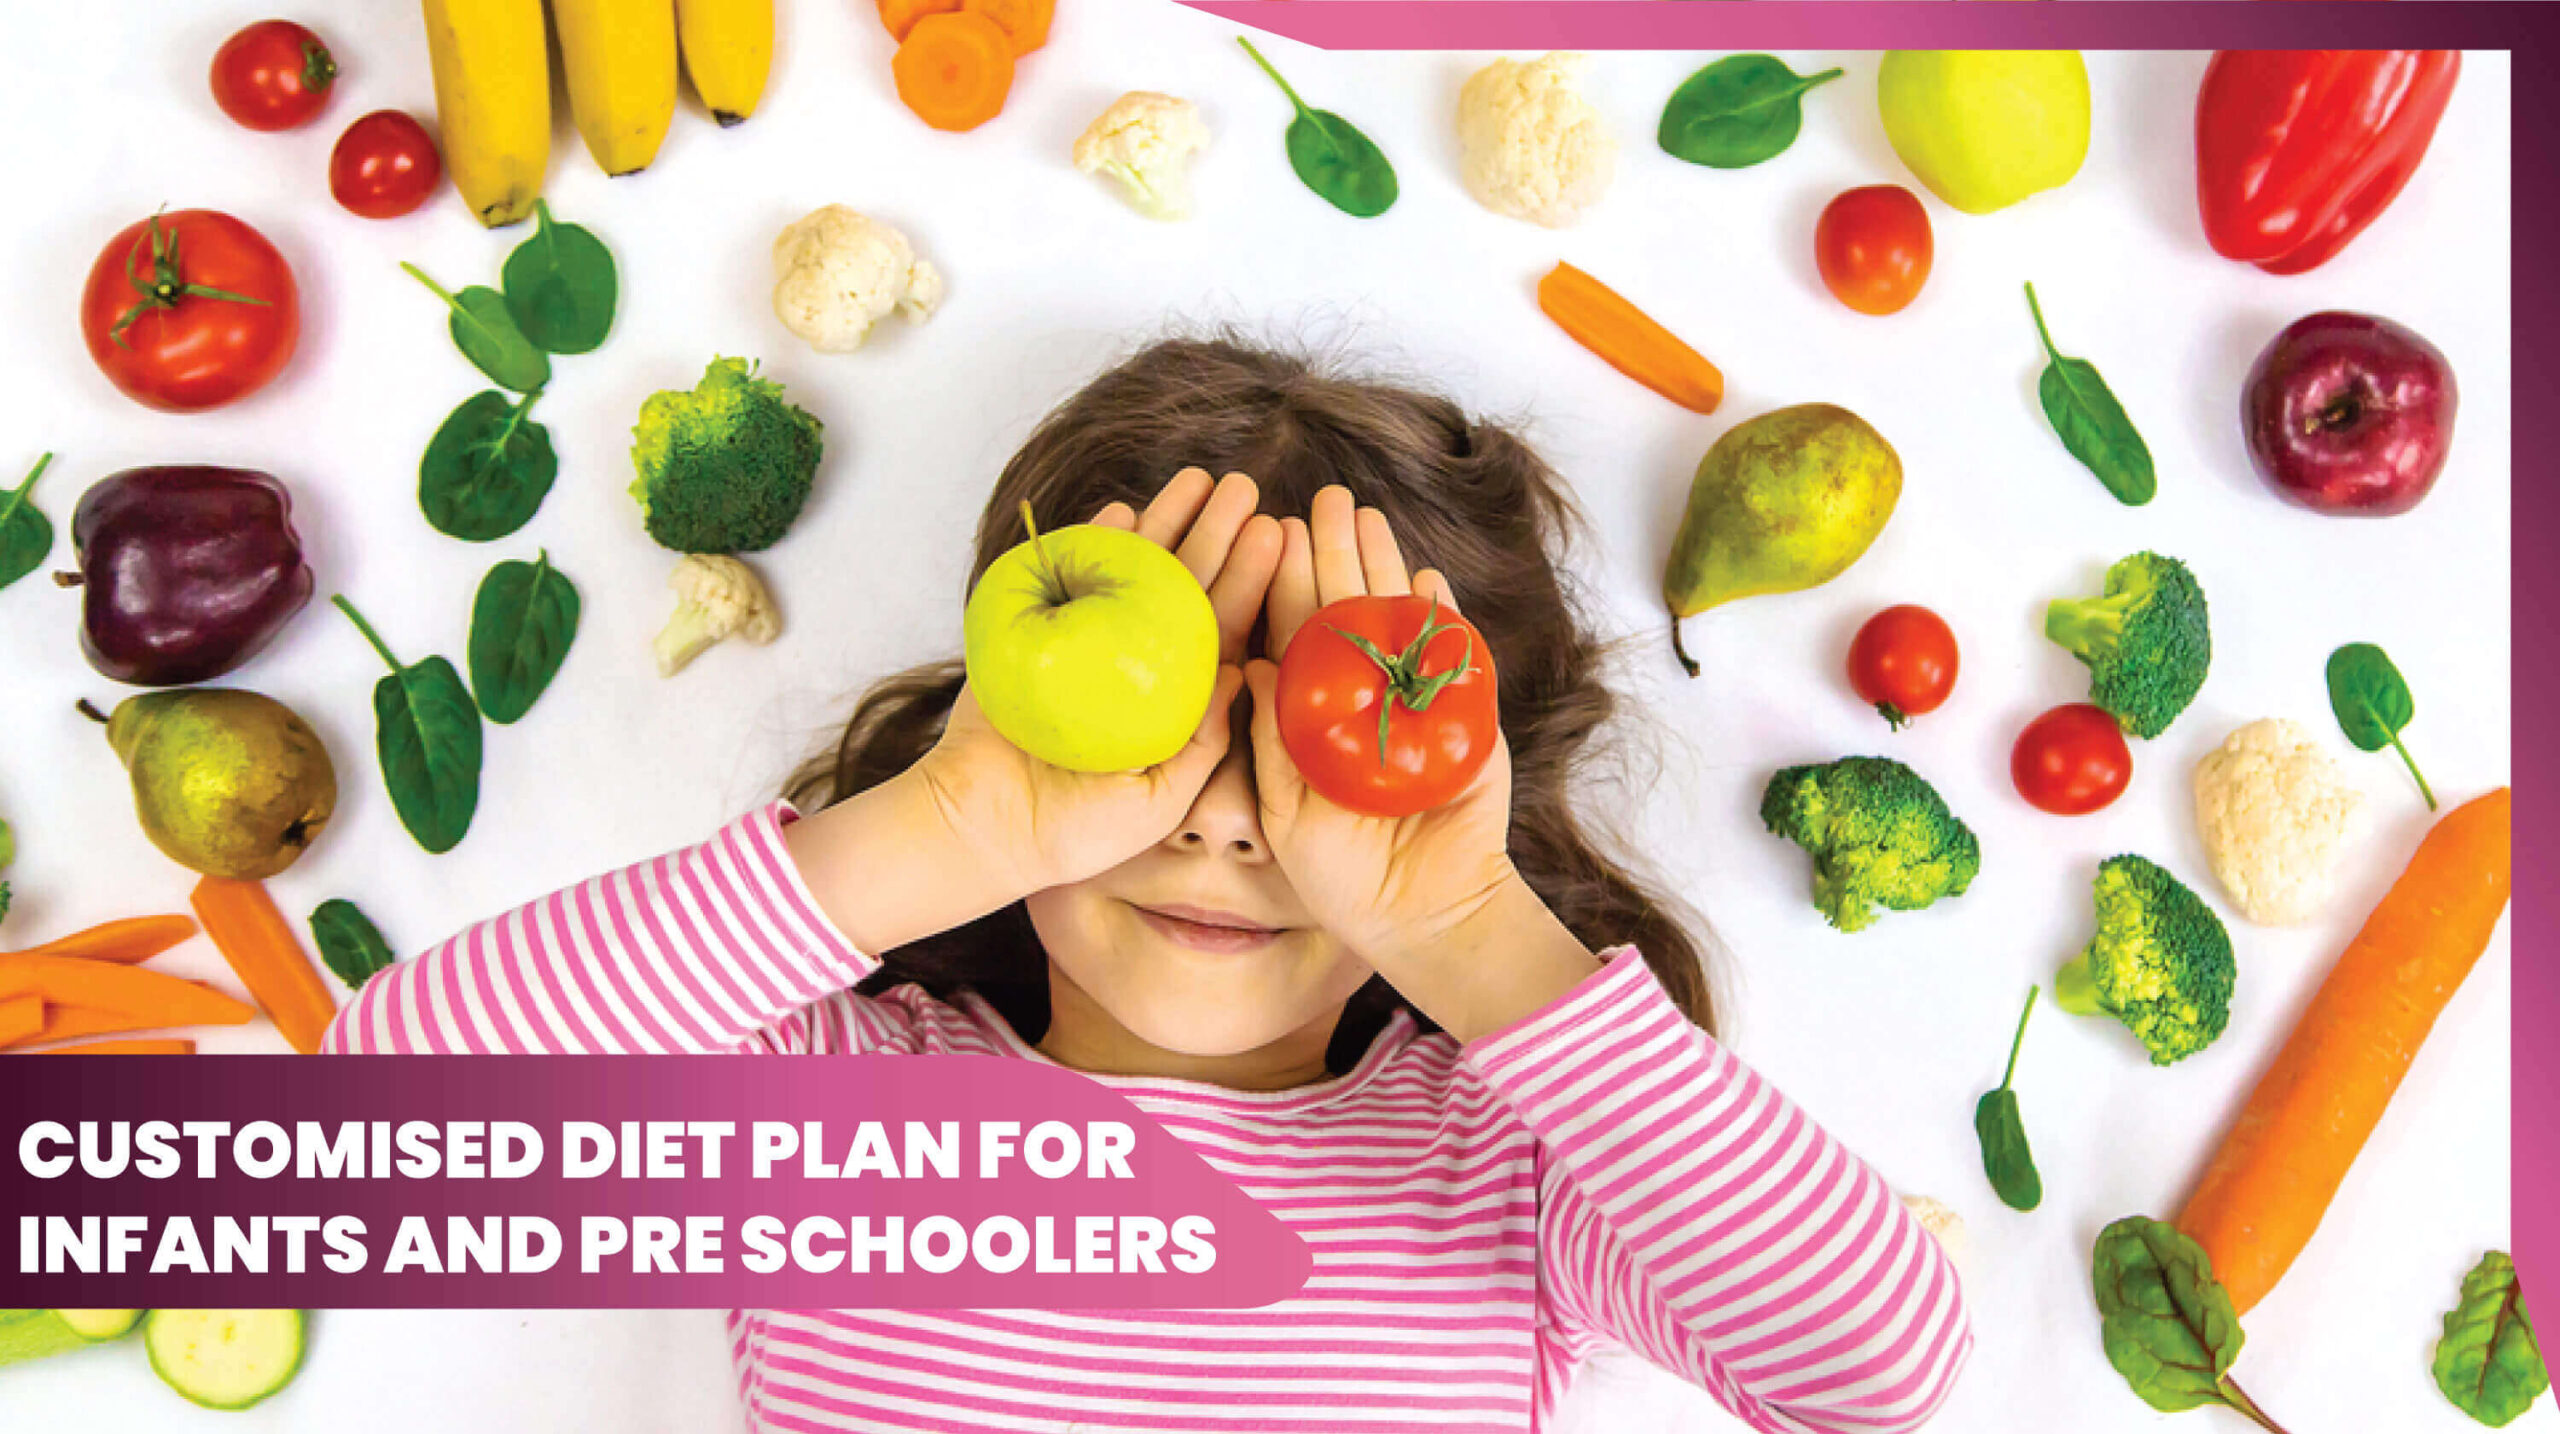 11customised diet plan for infants and preschoolers